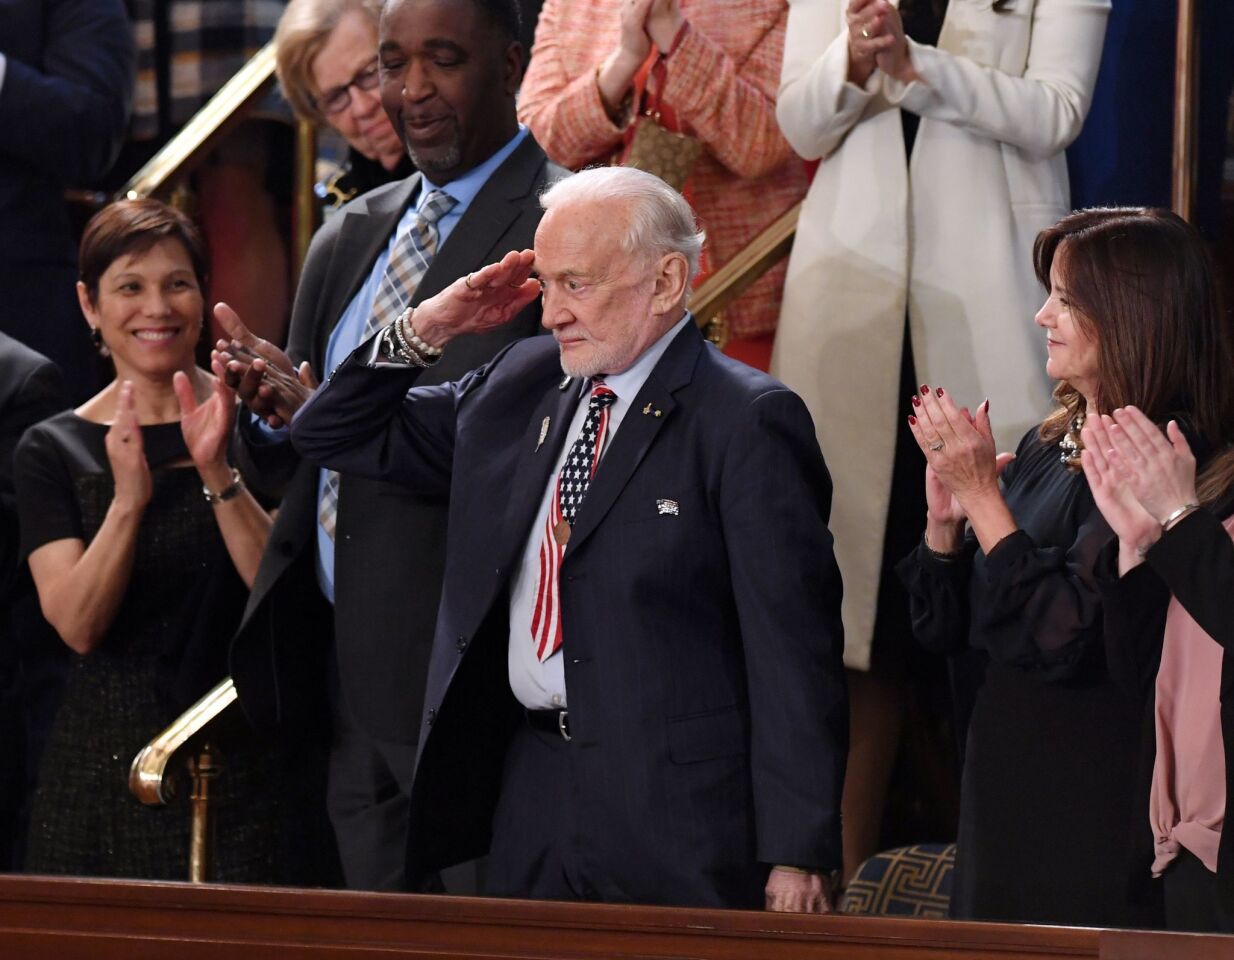 Former NASA astronaut Buzz Aldrin salutes as he is recognized by the president.